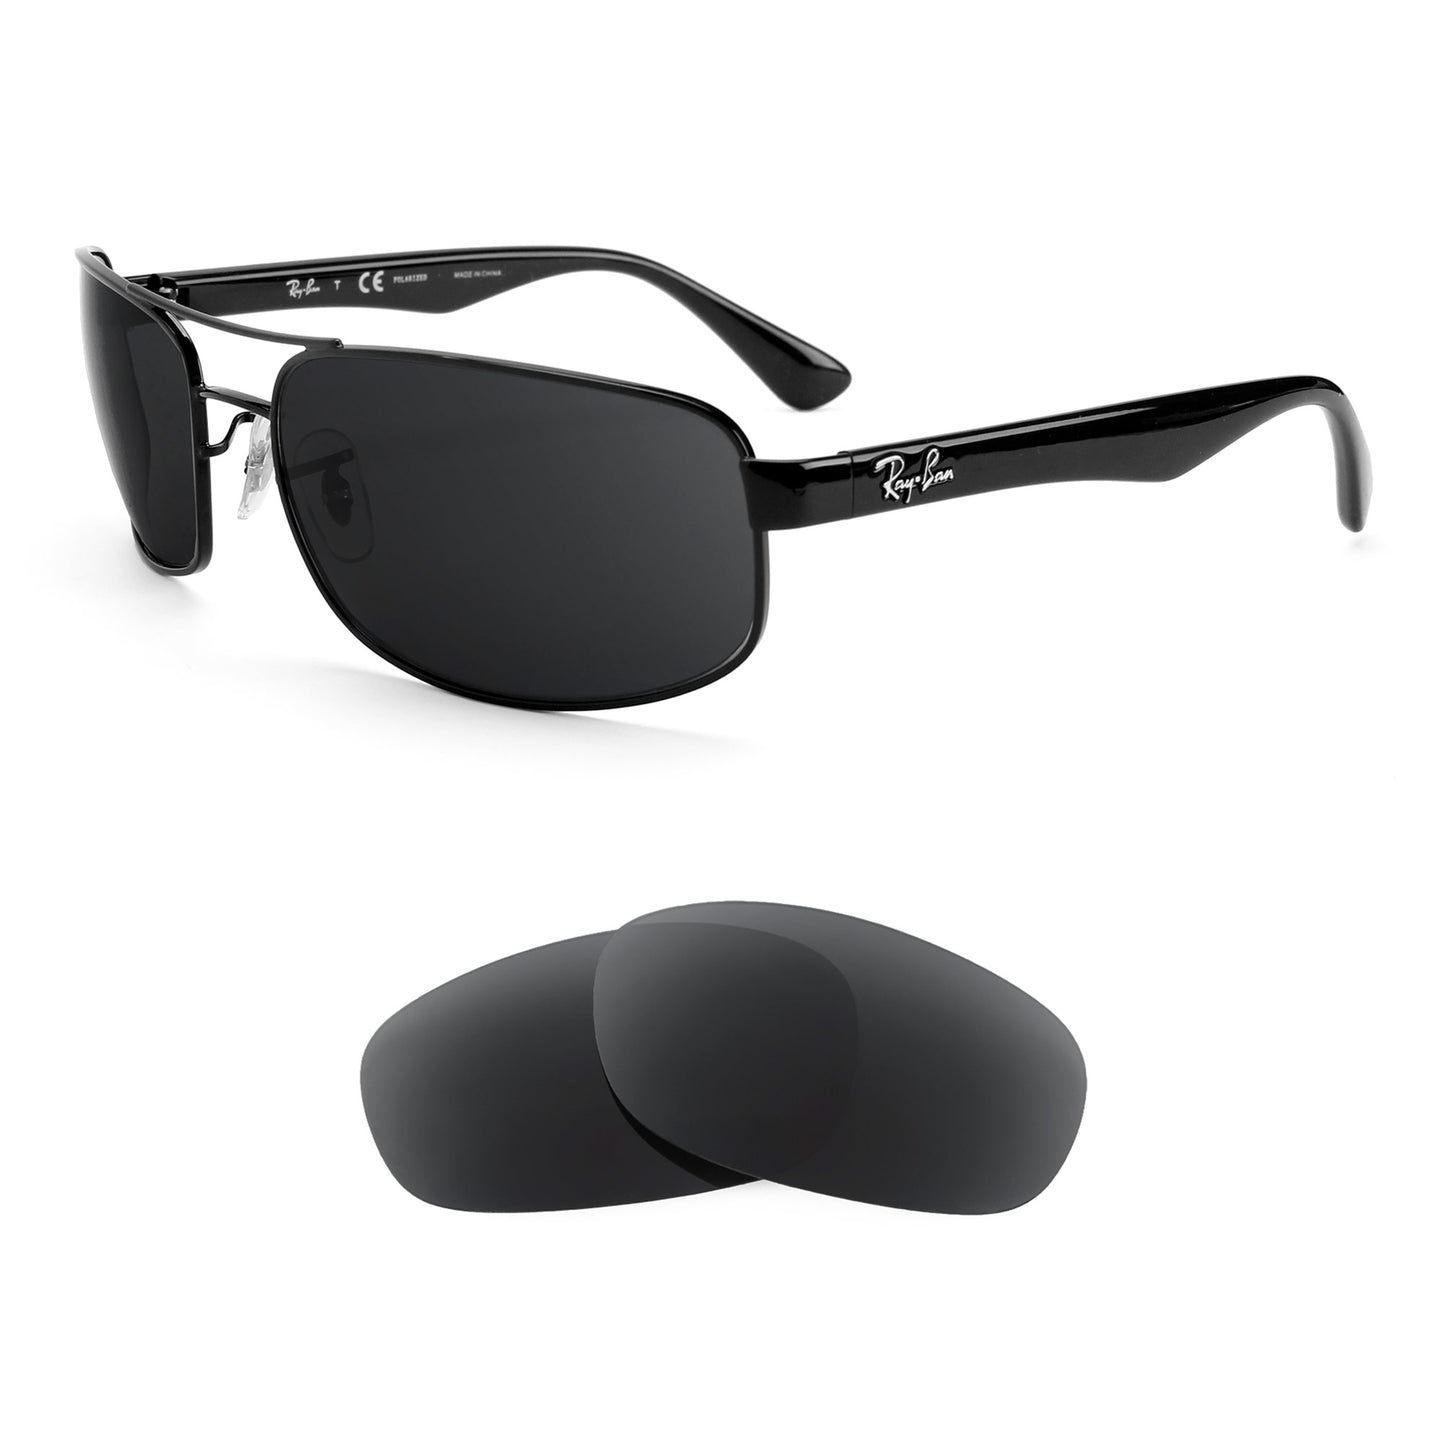 Ray-Ban RB3445 61mm sunglasses with replacement lenses